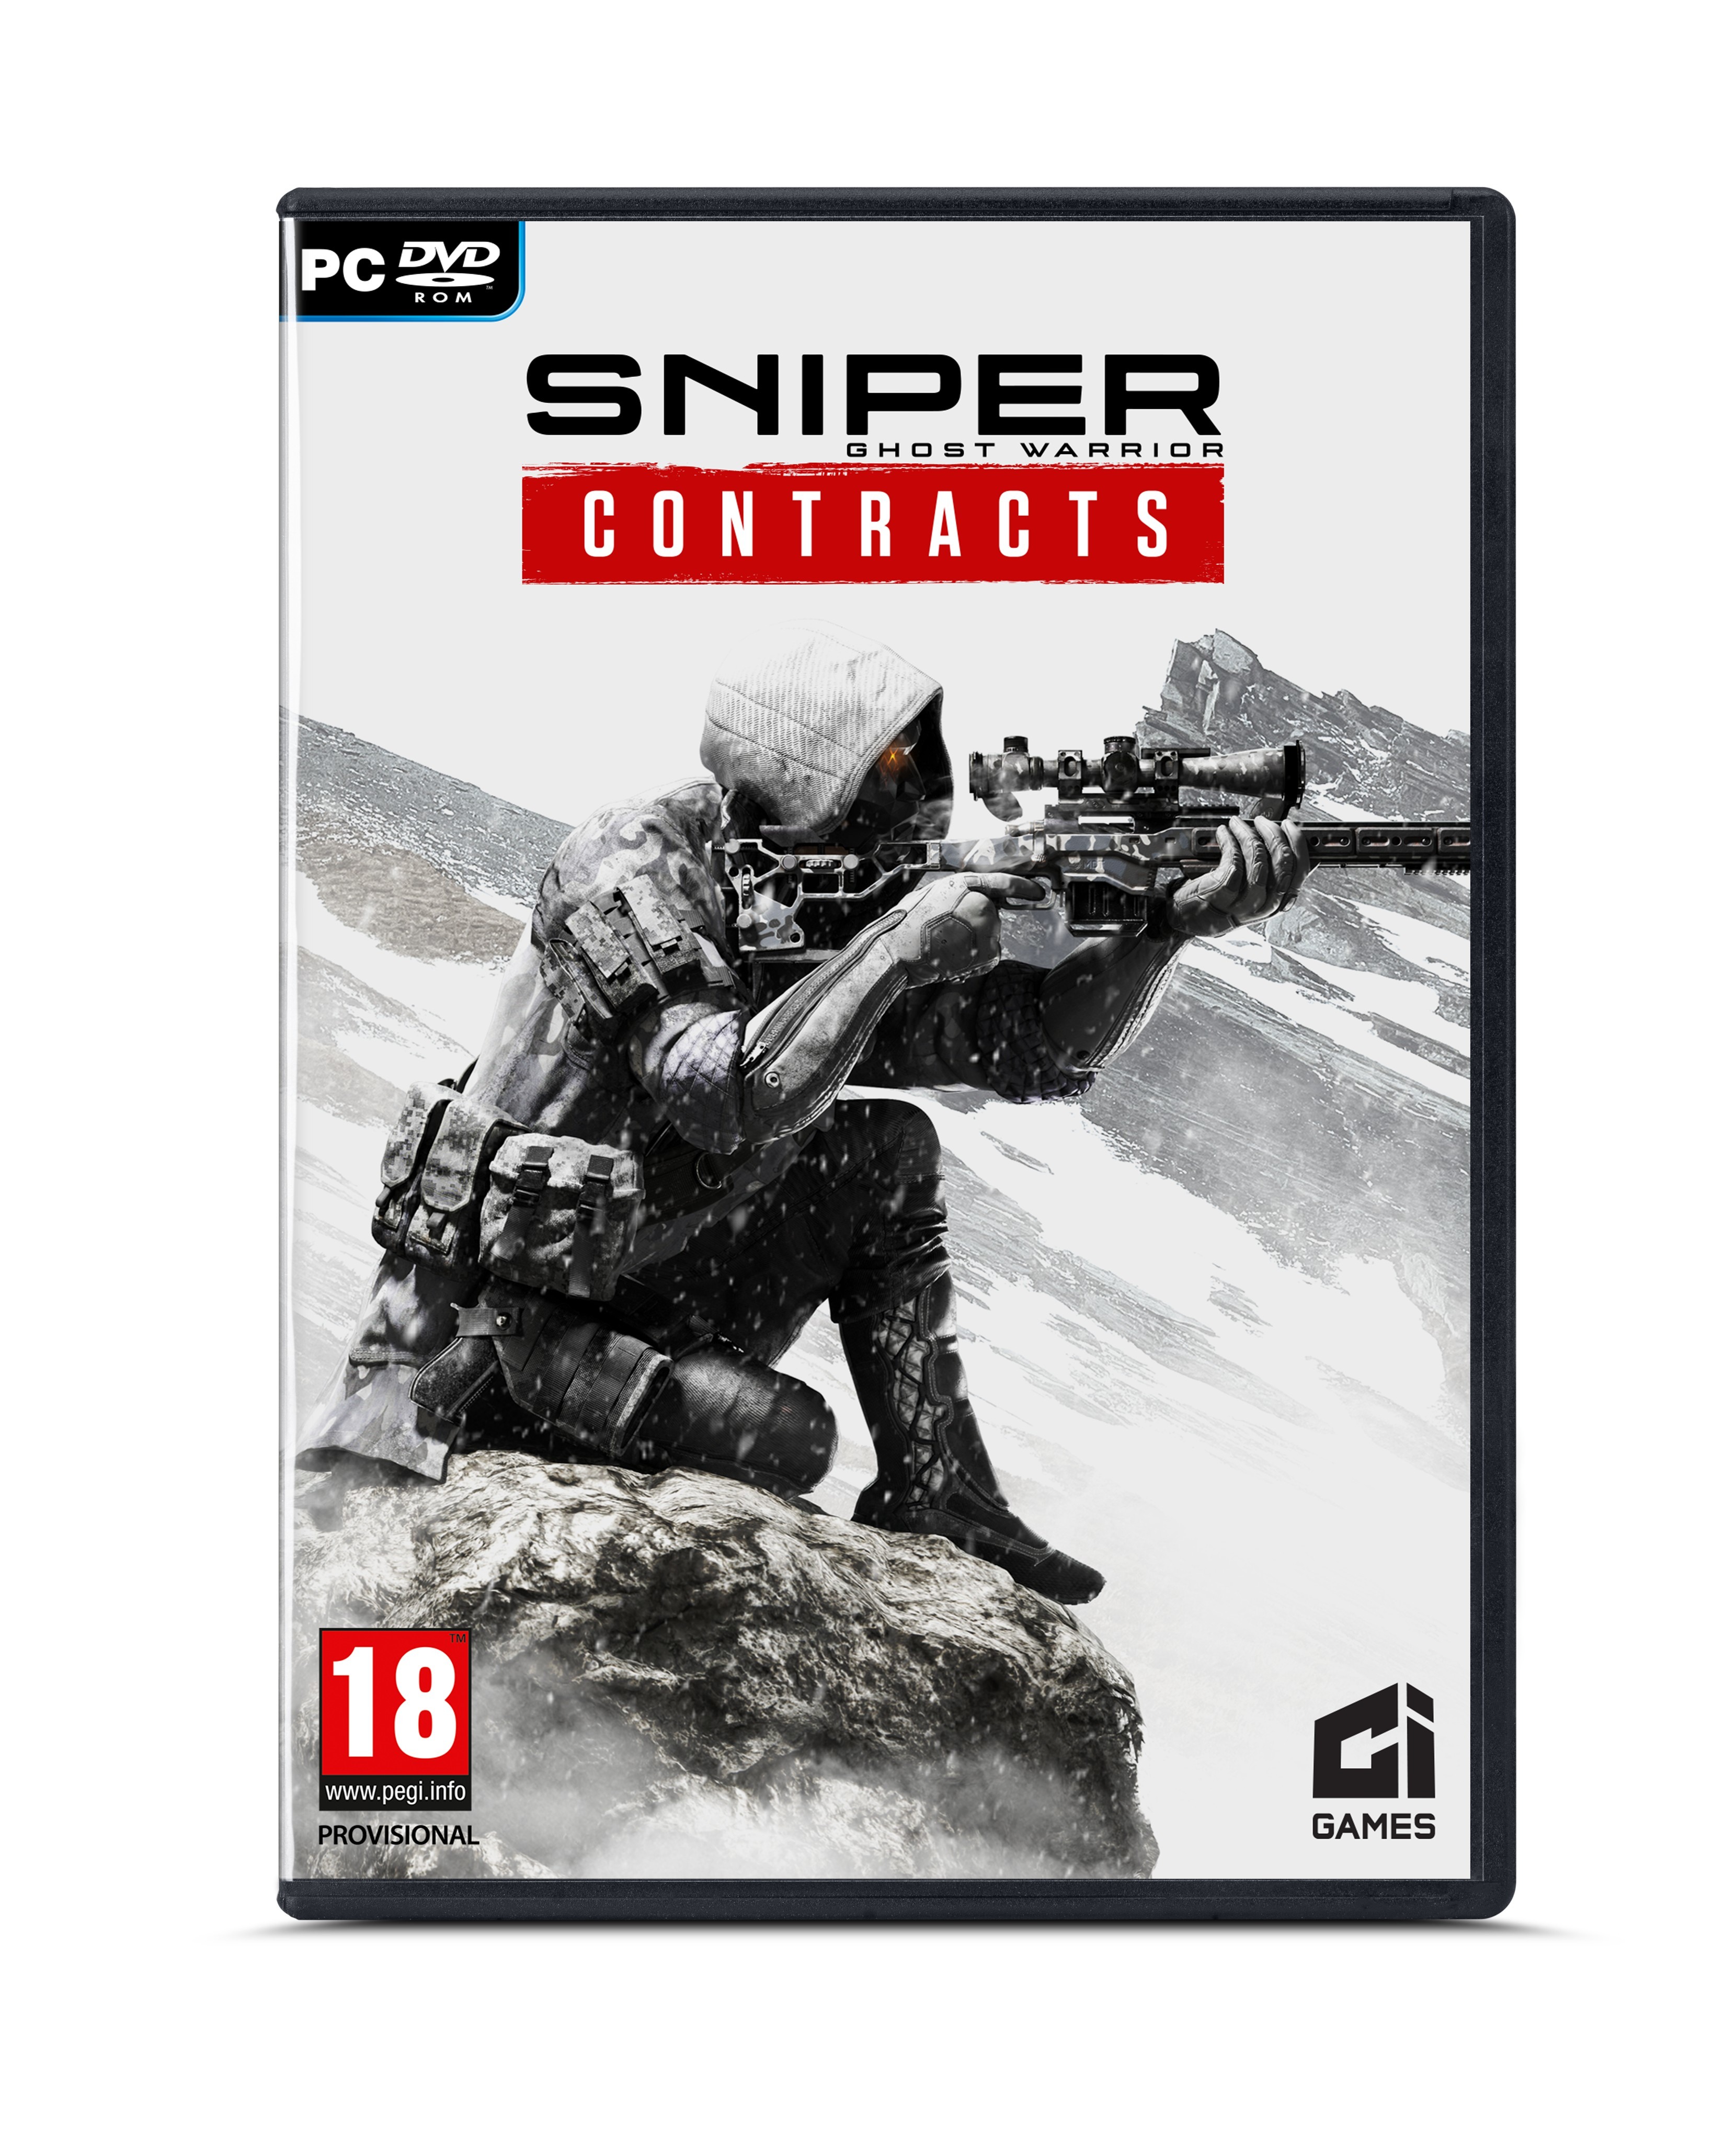 Sniper Ghost Warrior Contracts. Sniper Ghost Warrior 3 обложка. Sniper: Ghost Warrior Contracts 2. Sniper Ghost Warrior Contracts обложка. St games ru